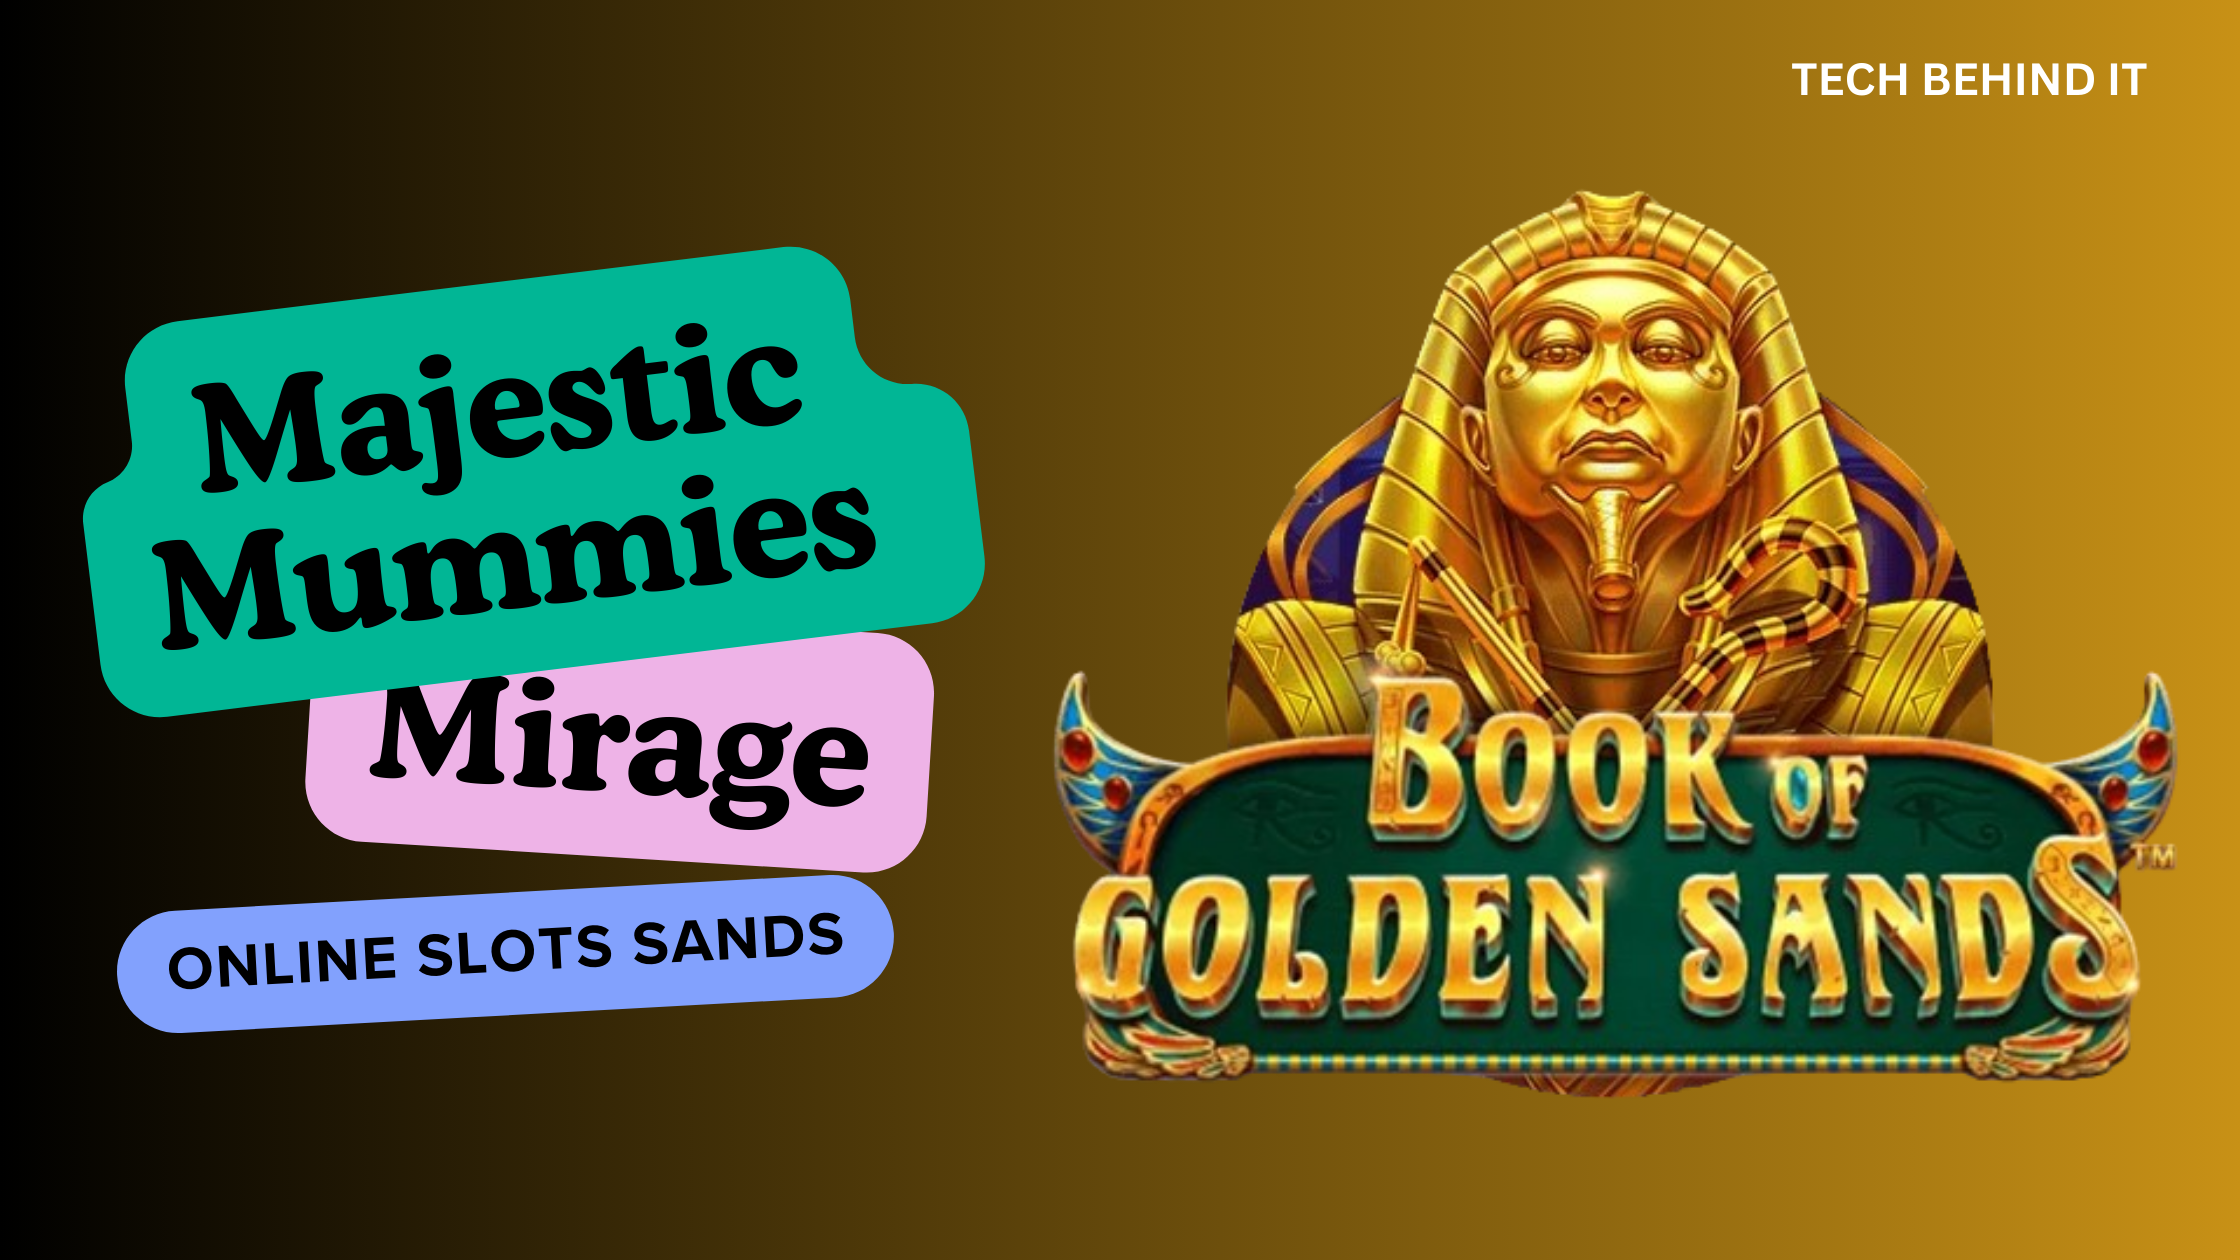 Majestic Mummies Mirage: Ancient Fortunes Unearthed in Online Slot Sands